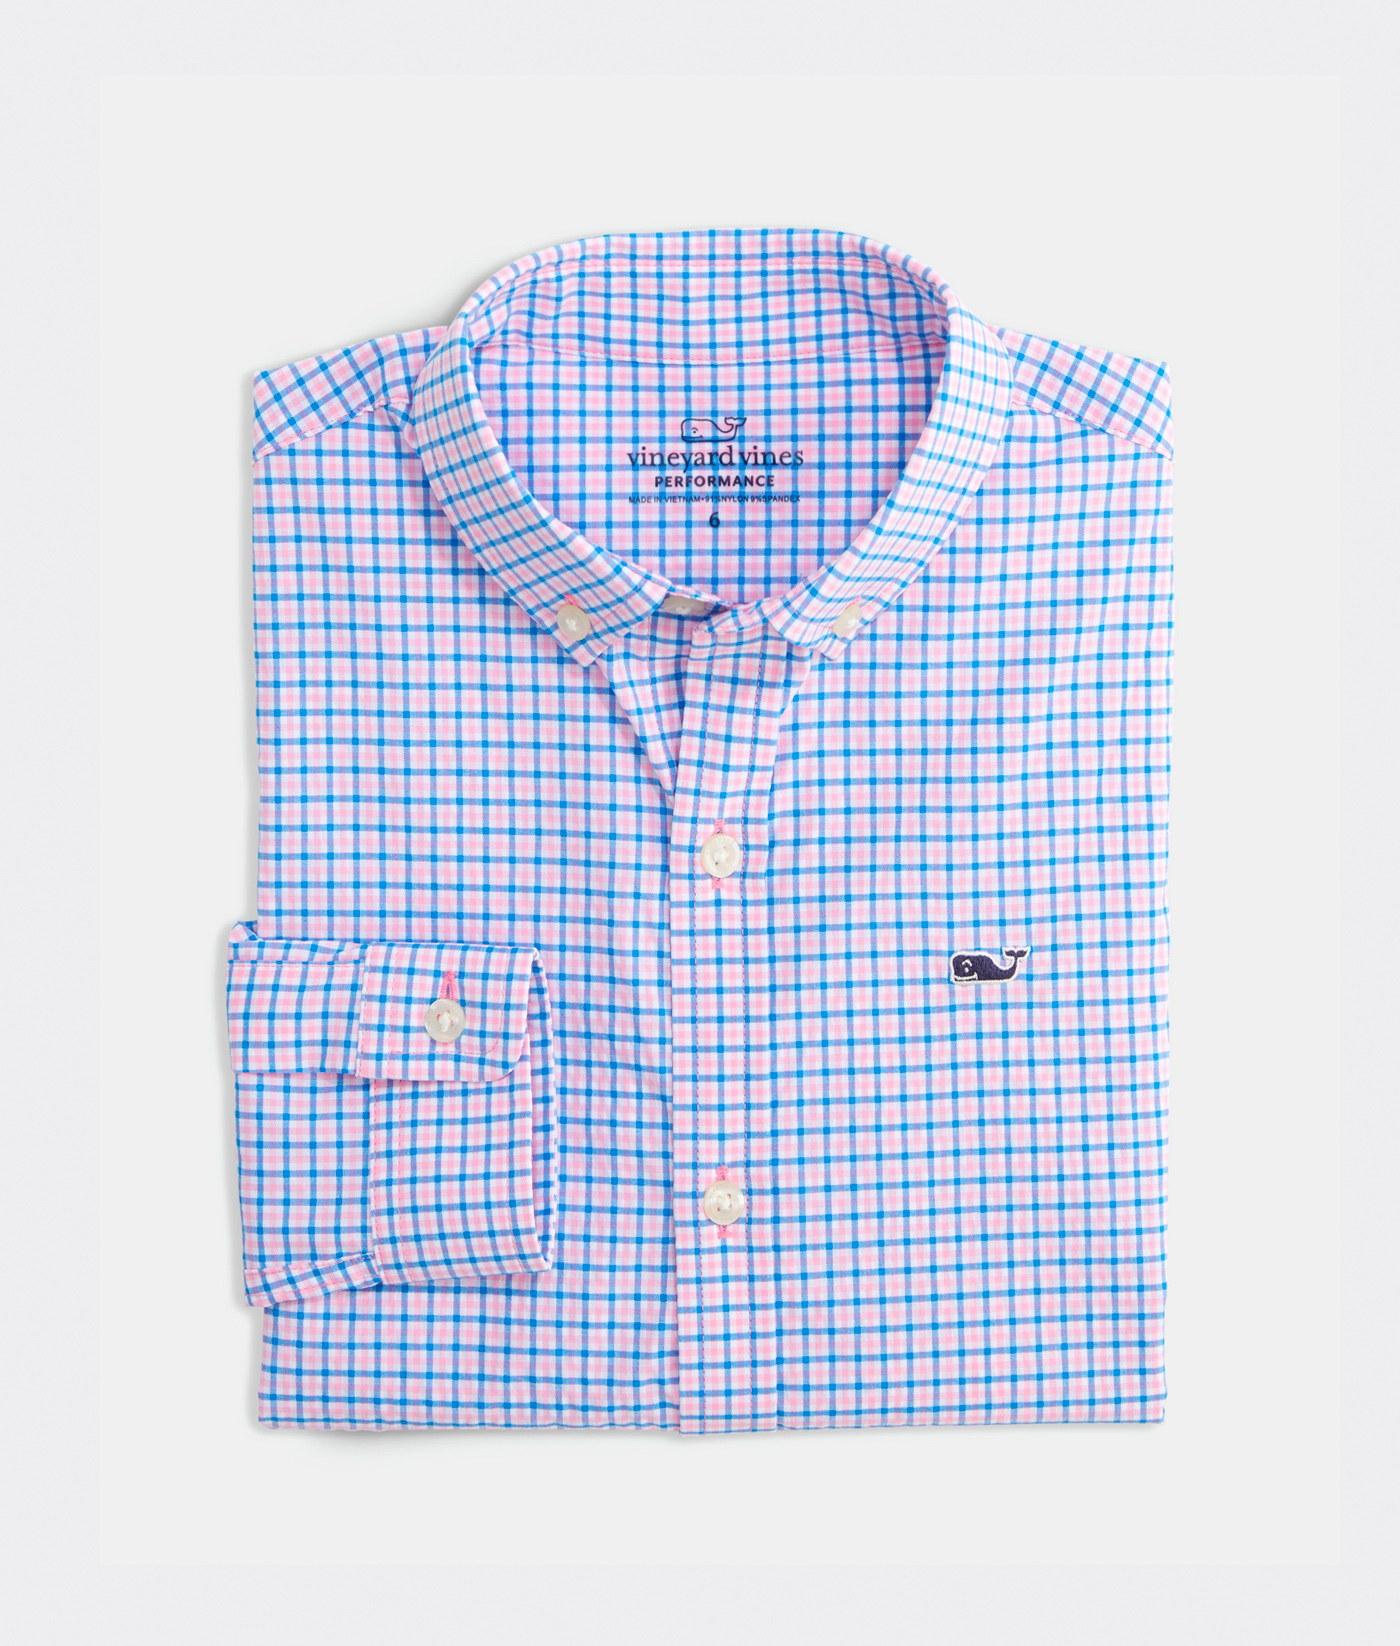 16 Details about   VINEYARD VINES Boys Checkered Whale Shirts Button Down Large 